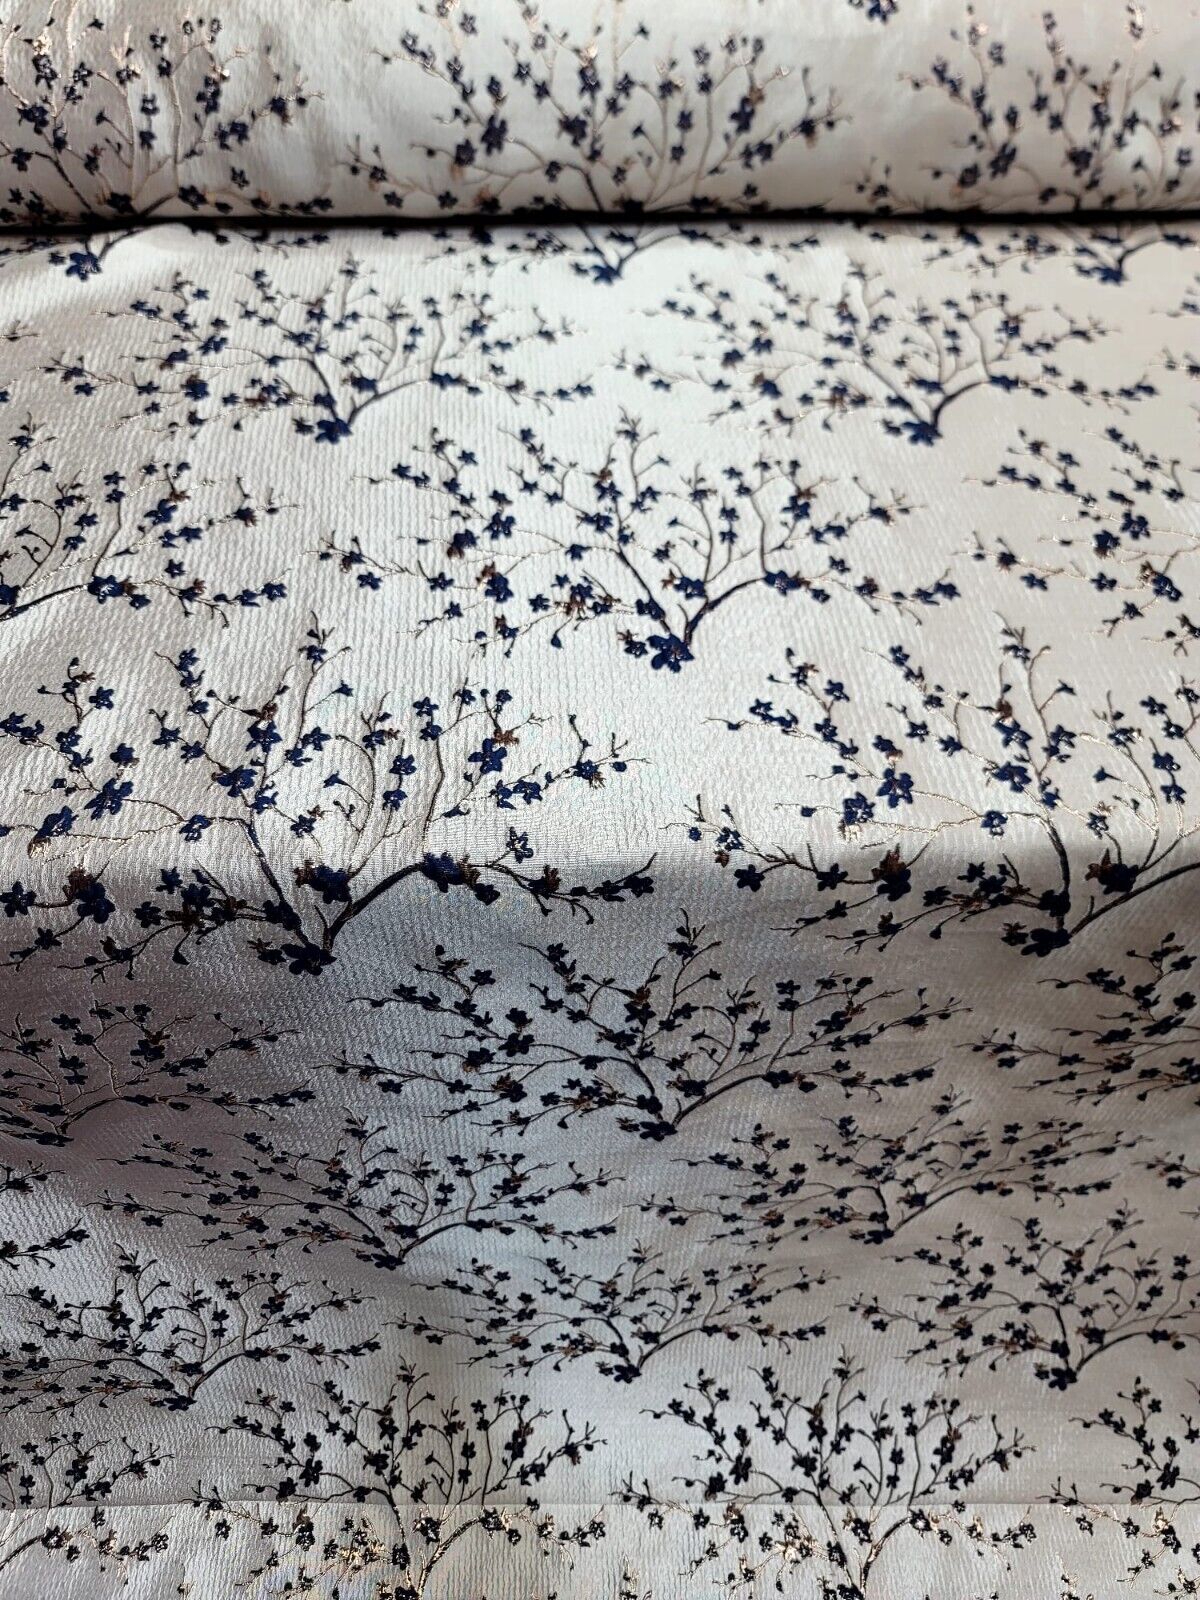 NAVY BLUE Metallic Rose Gold Floral Brocade Fabric - Sold by the Yard